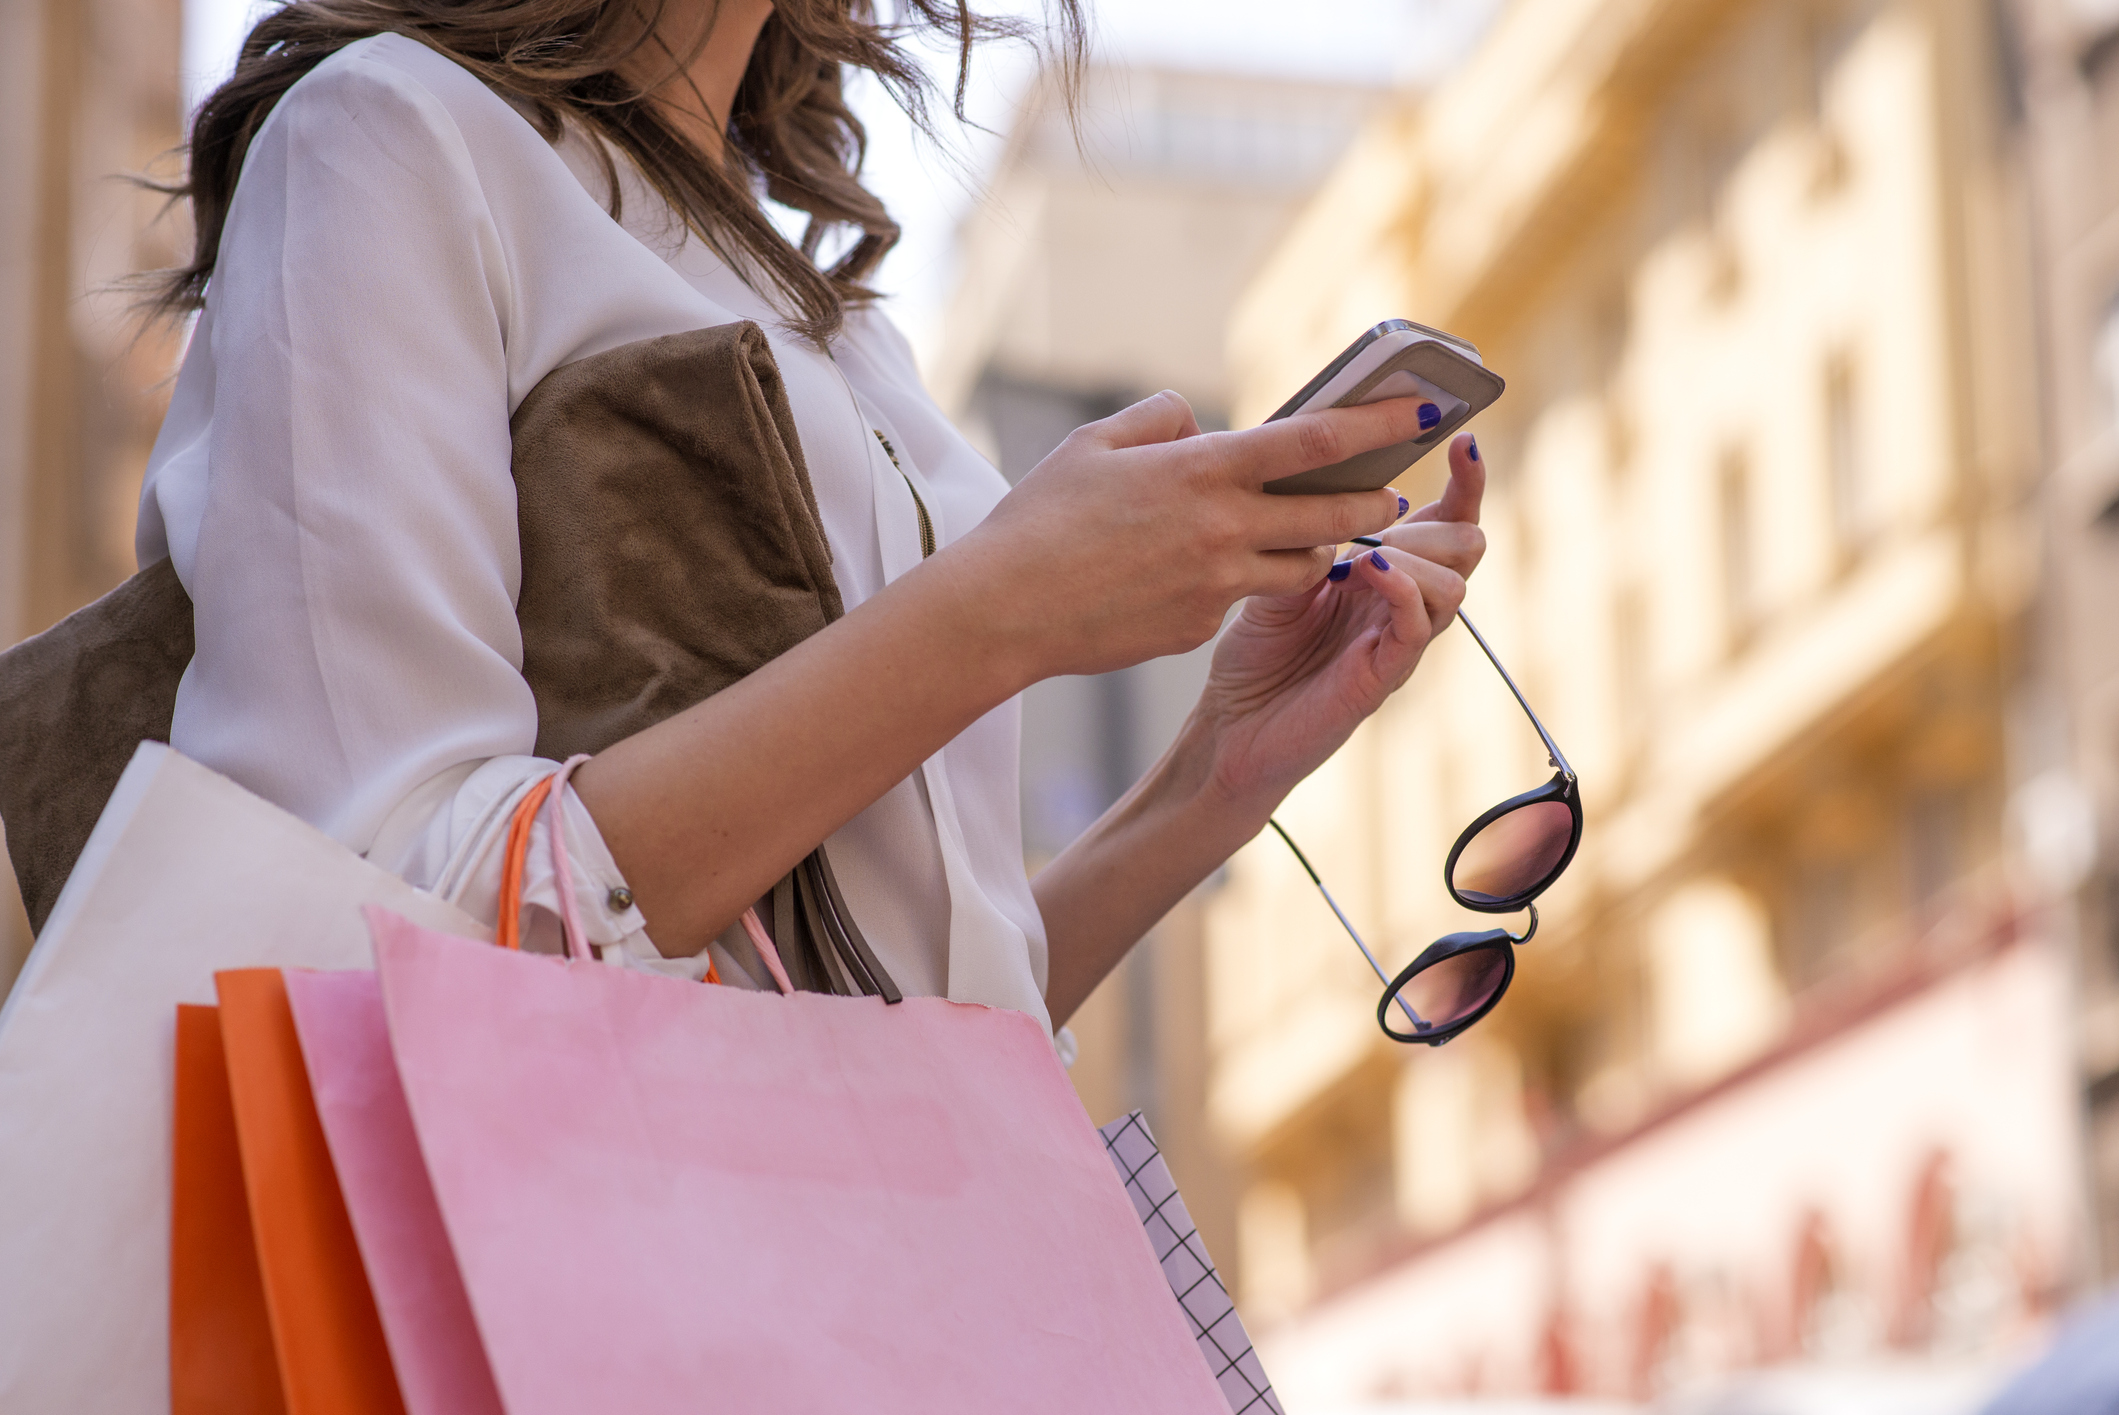 Women carrying shoppings bags and using smartphone